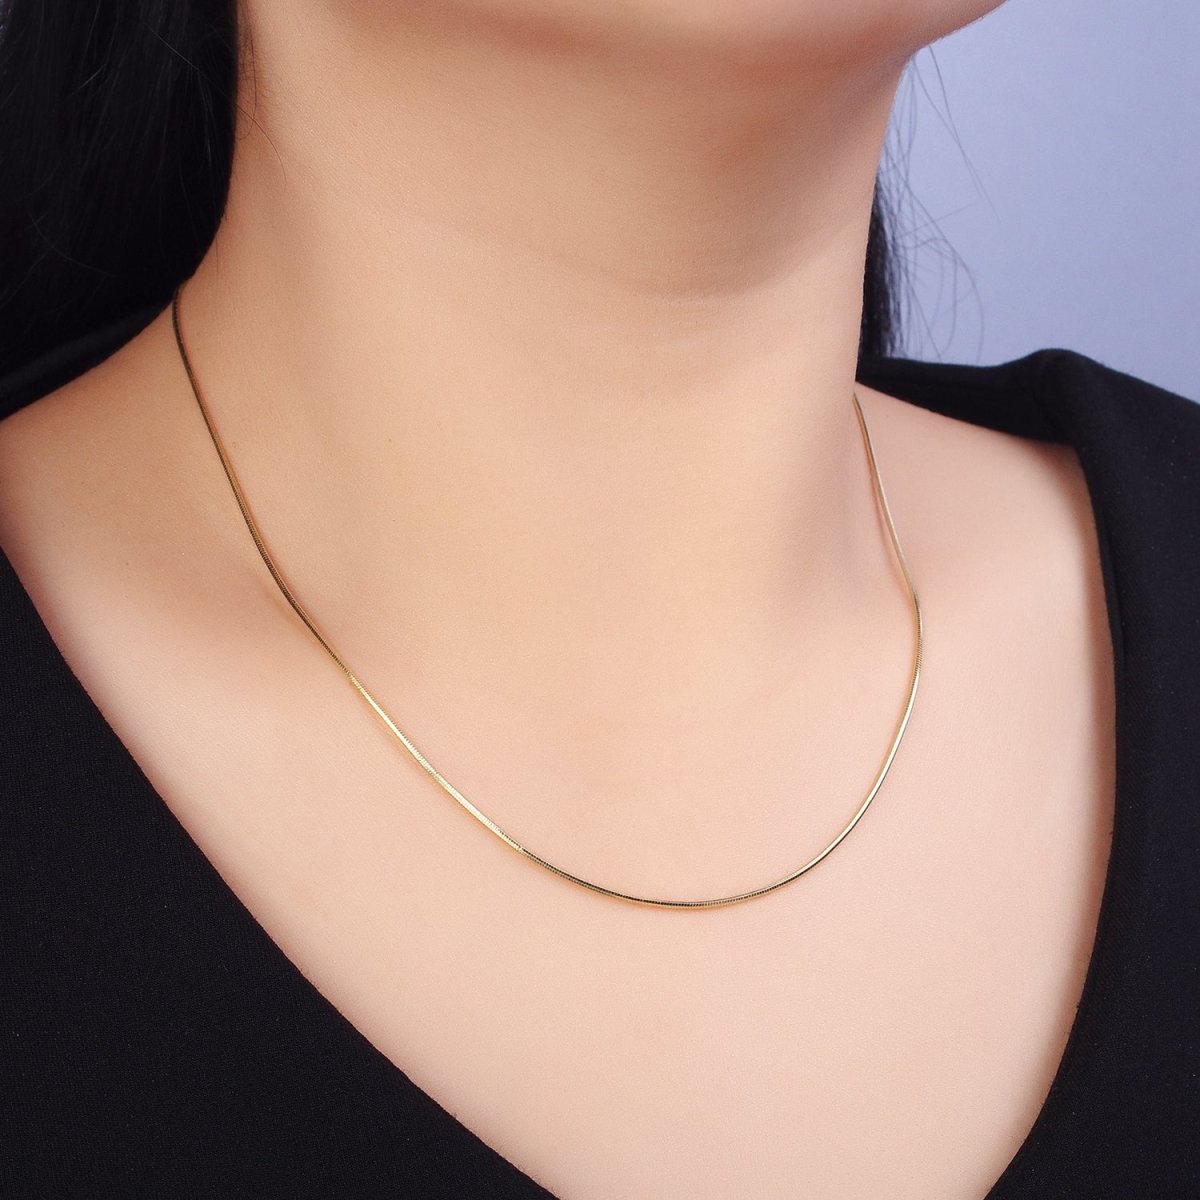 Dainty Gold Snake Chain Necklace - Gold Filled Herringbone Necklace, Thin Herringbone Chain 18 inch Necklace | WA-1586 Clearance Pricing - DLUXCA